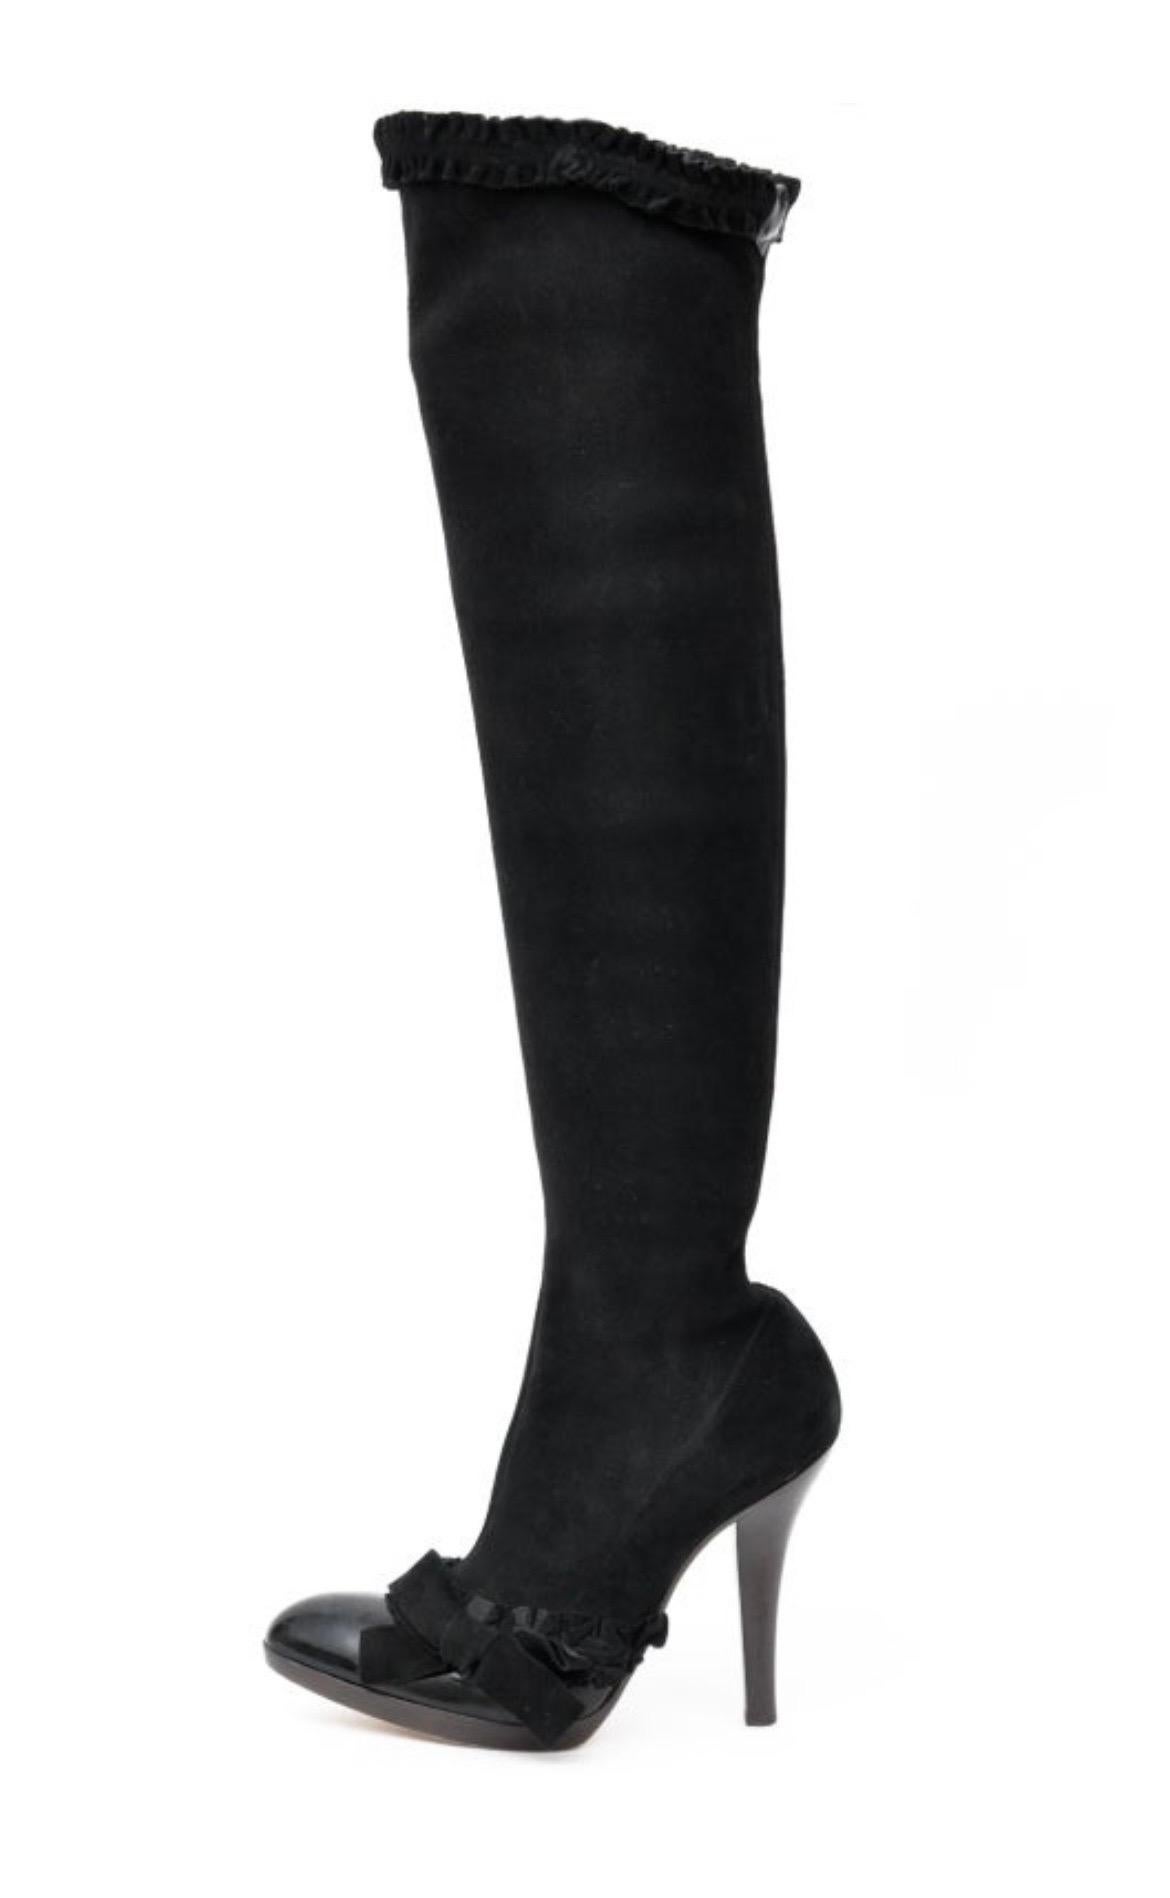 Women's A/W 2001 Tom Ford for Yves Saint Laurent Black Suede Over the Knee Boots 37 - 7 For Sale